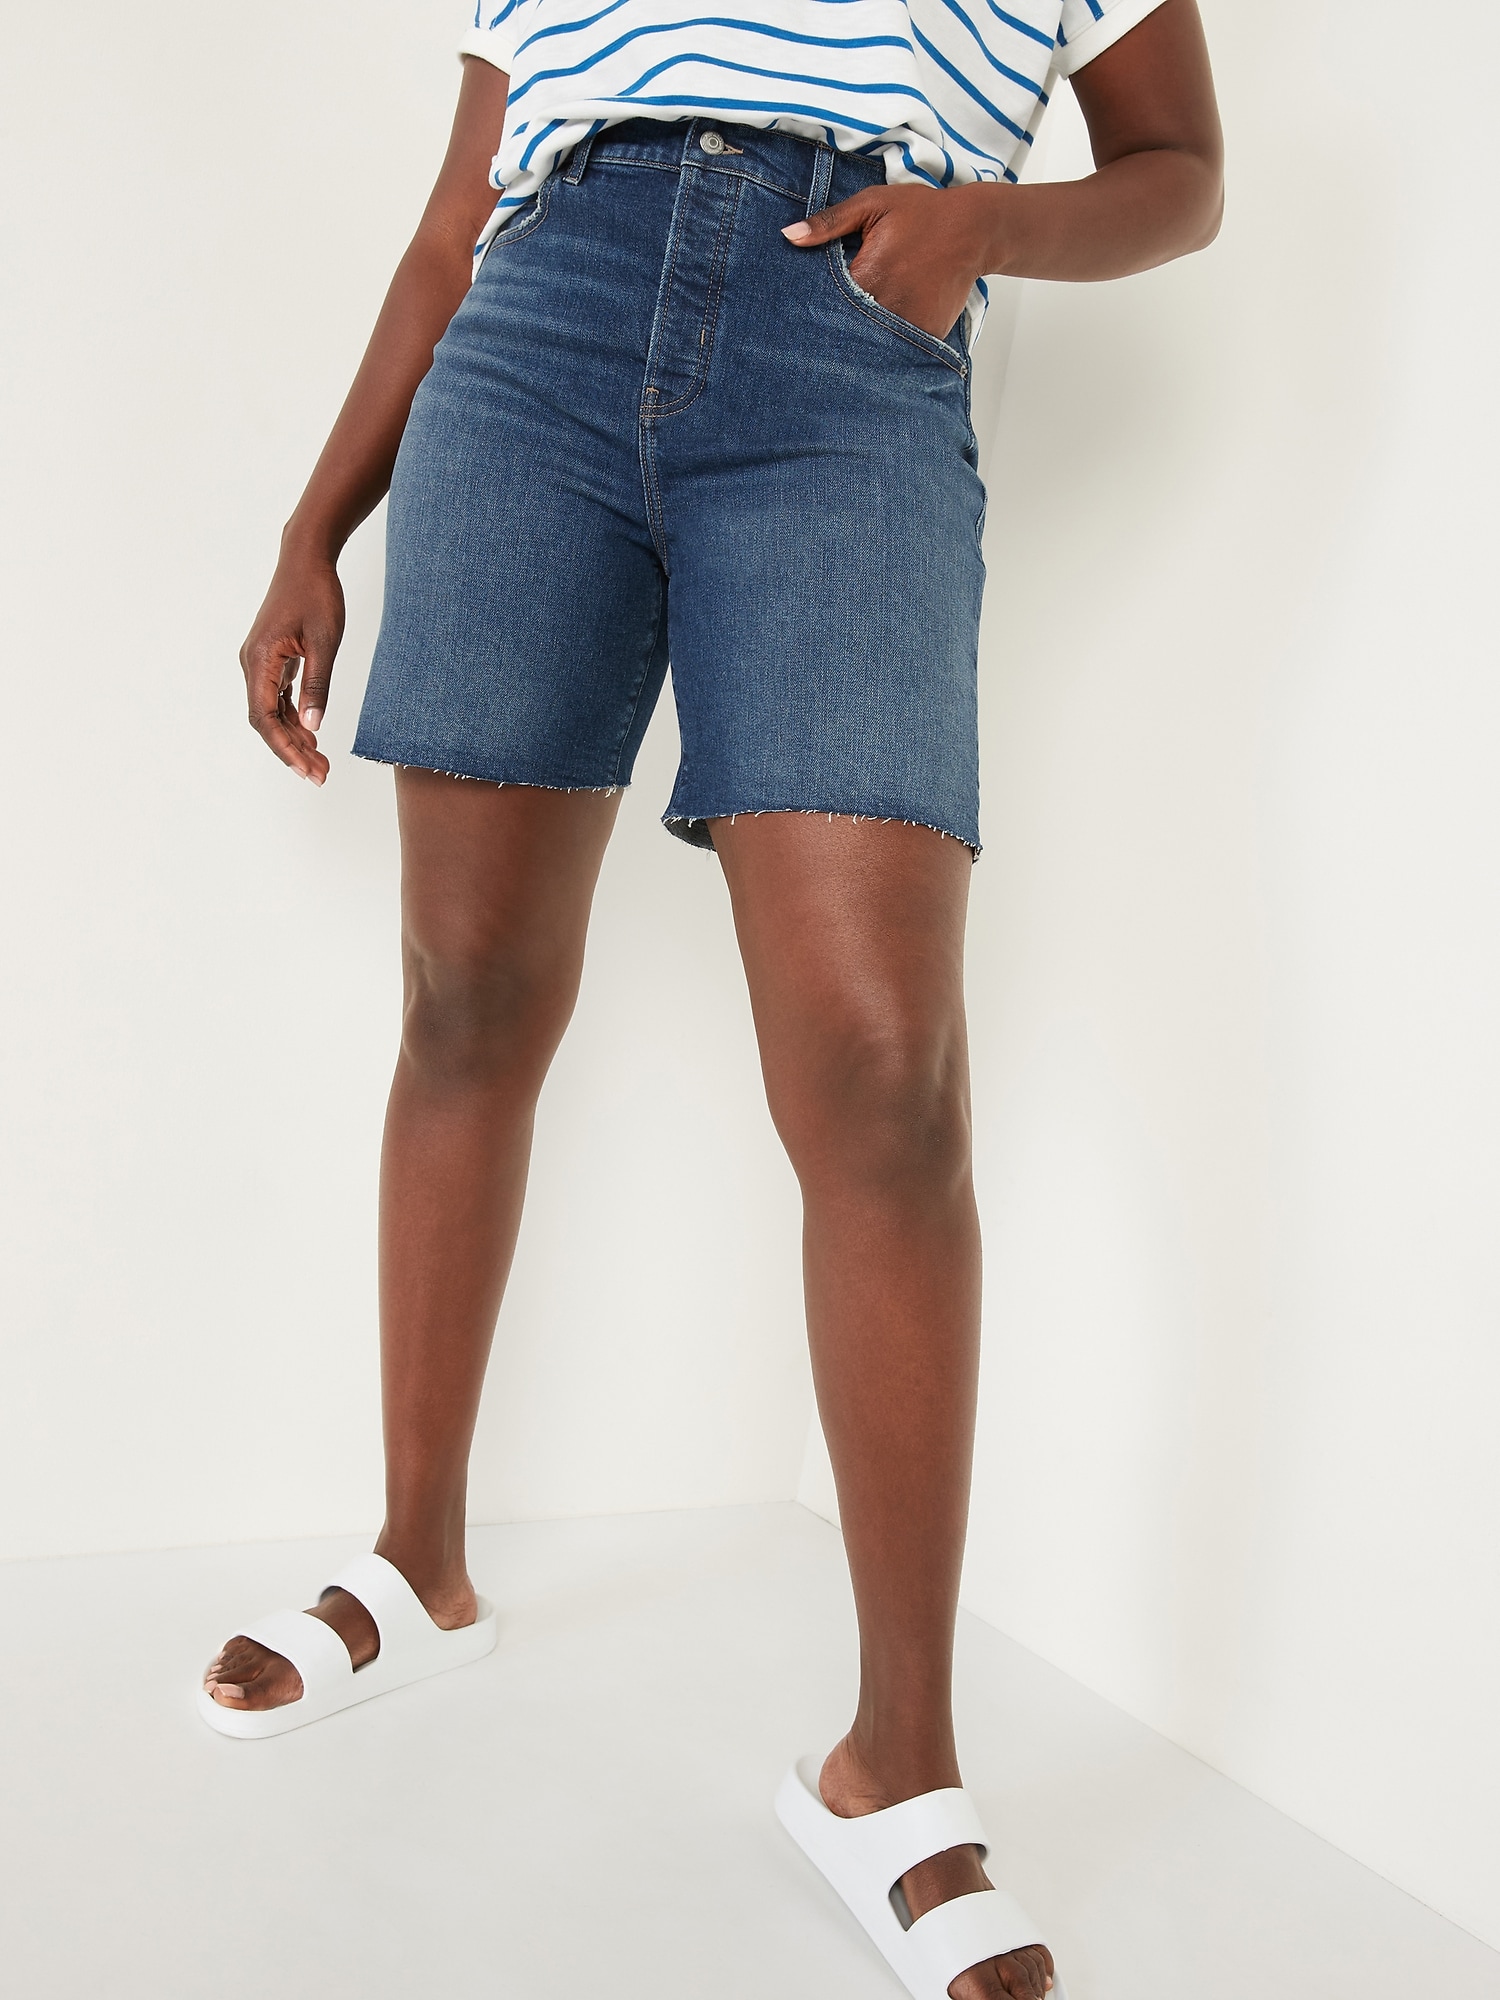 Extra High-Waisted Sky Hi Button-Fly Cut-Off Jean Shorts for Women -- 7-inch inseam